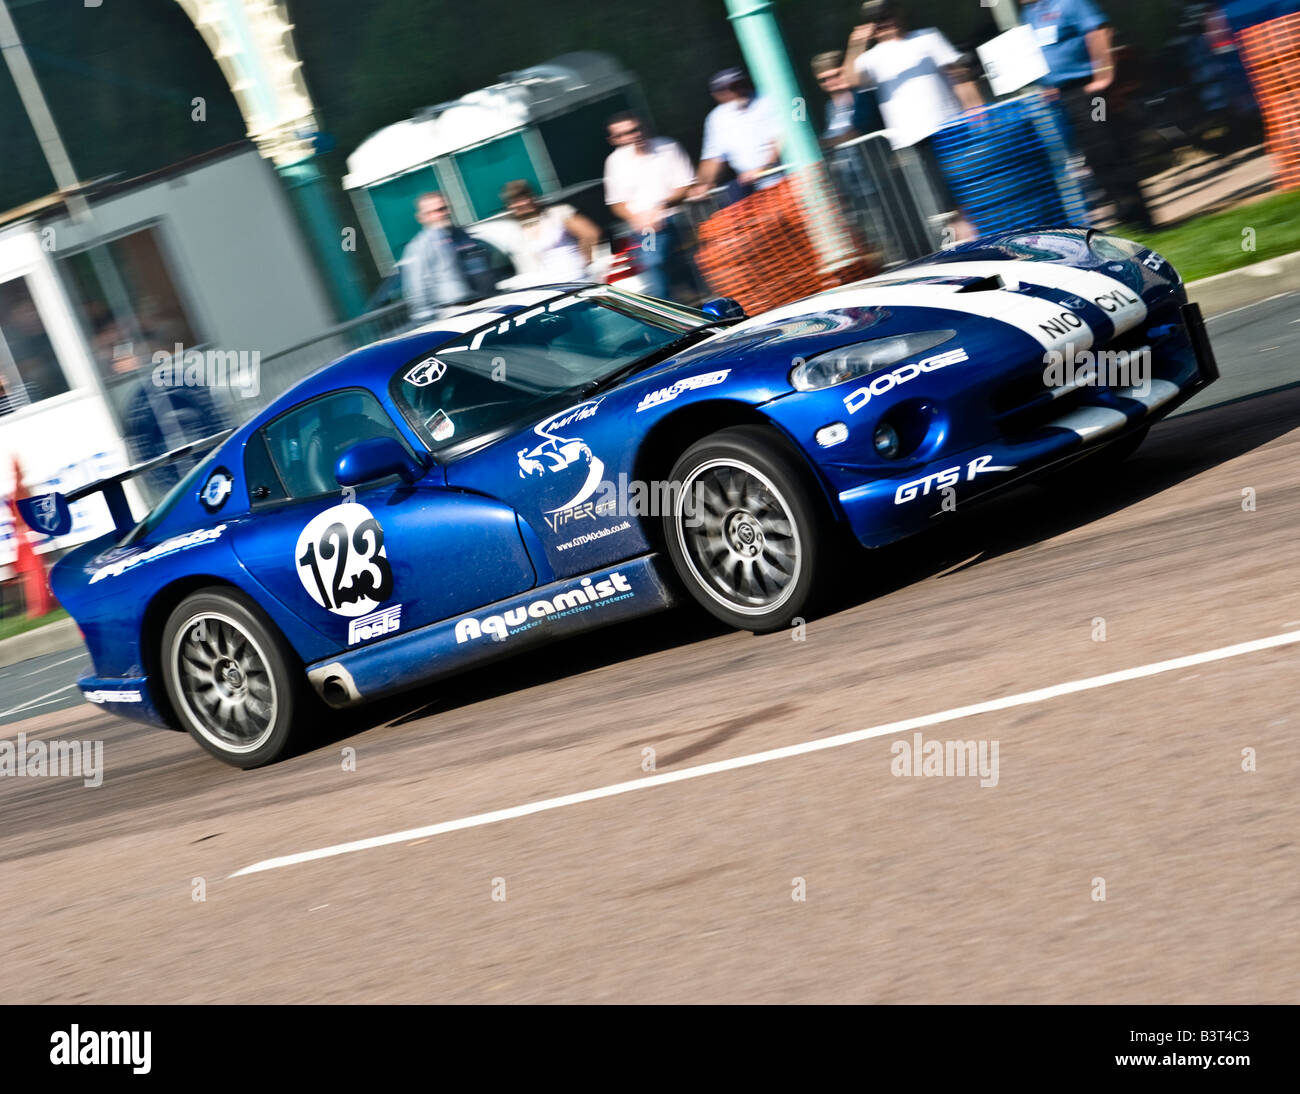 Dodge Viper in racing Blue with white dual pin stripes. Stock Photo